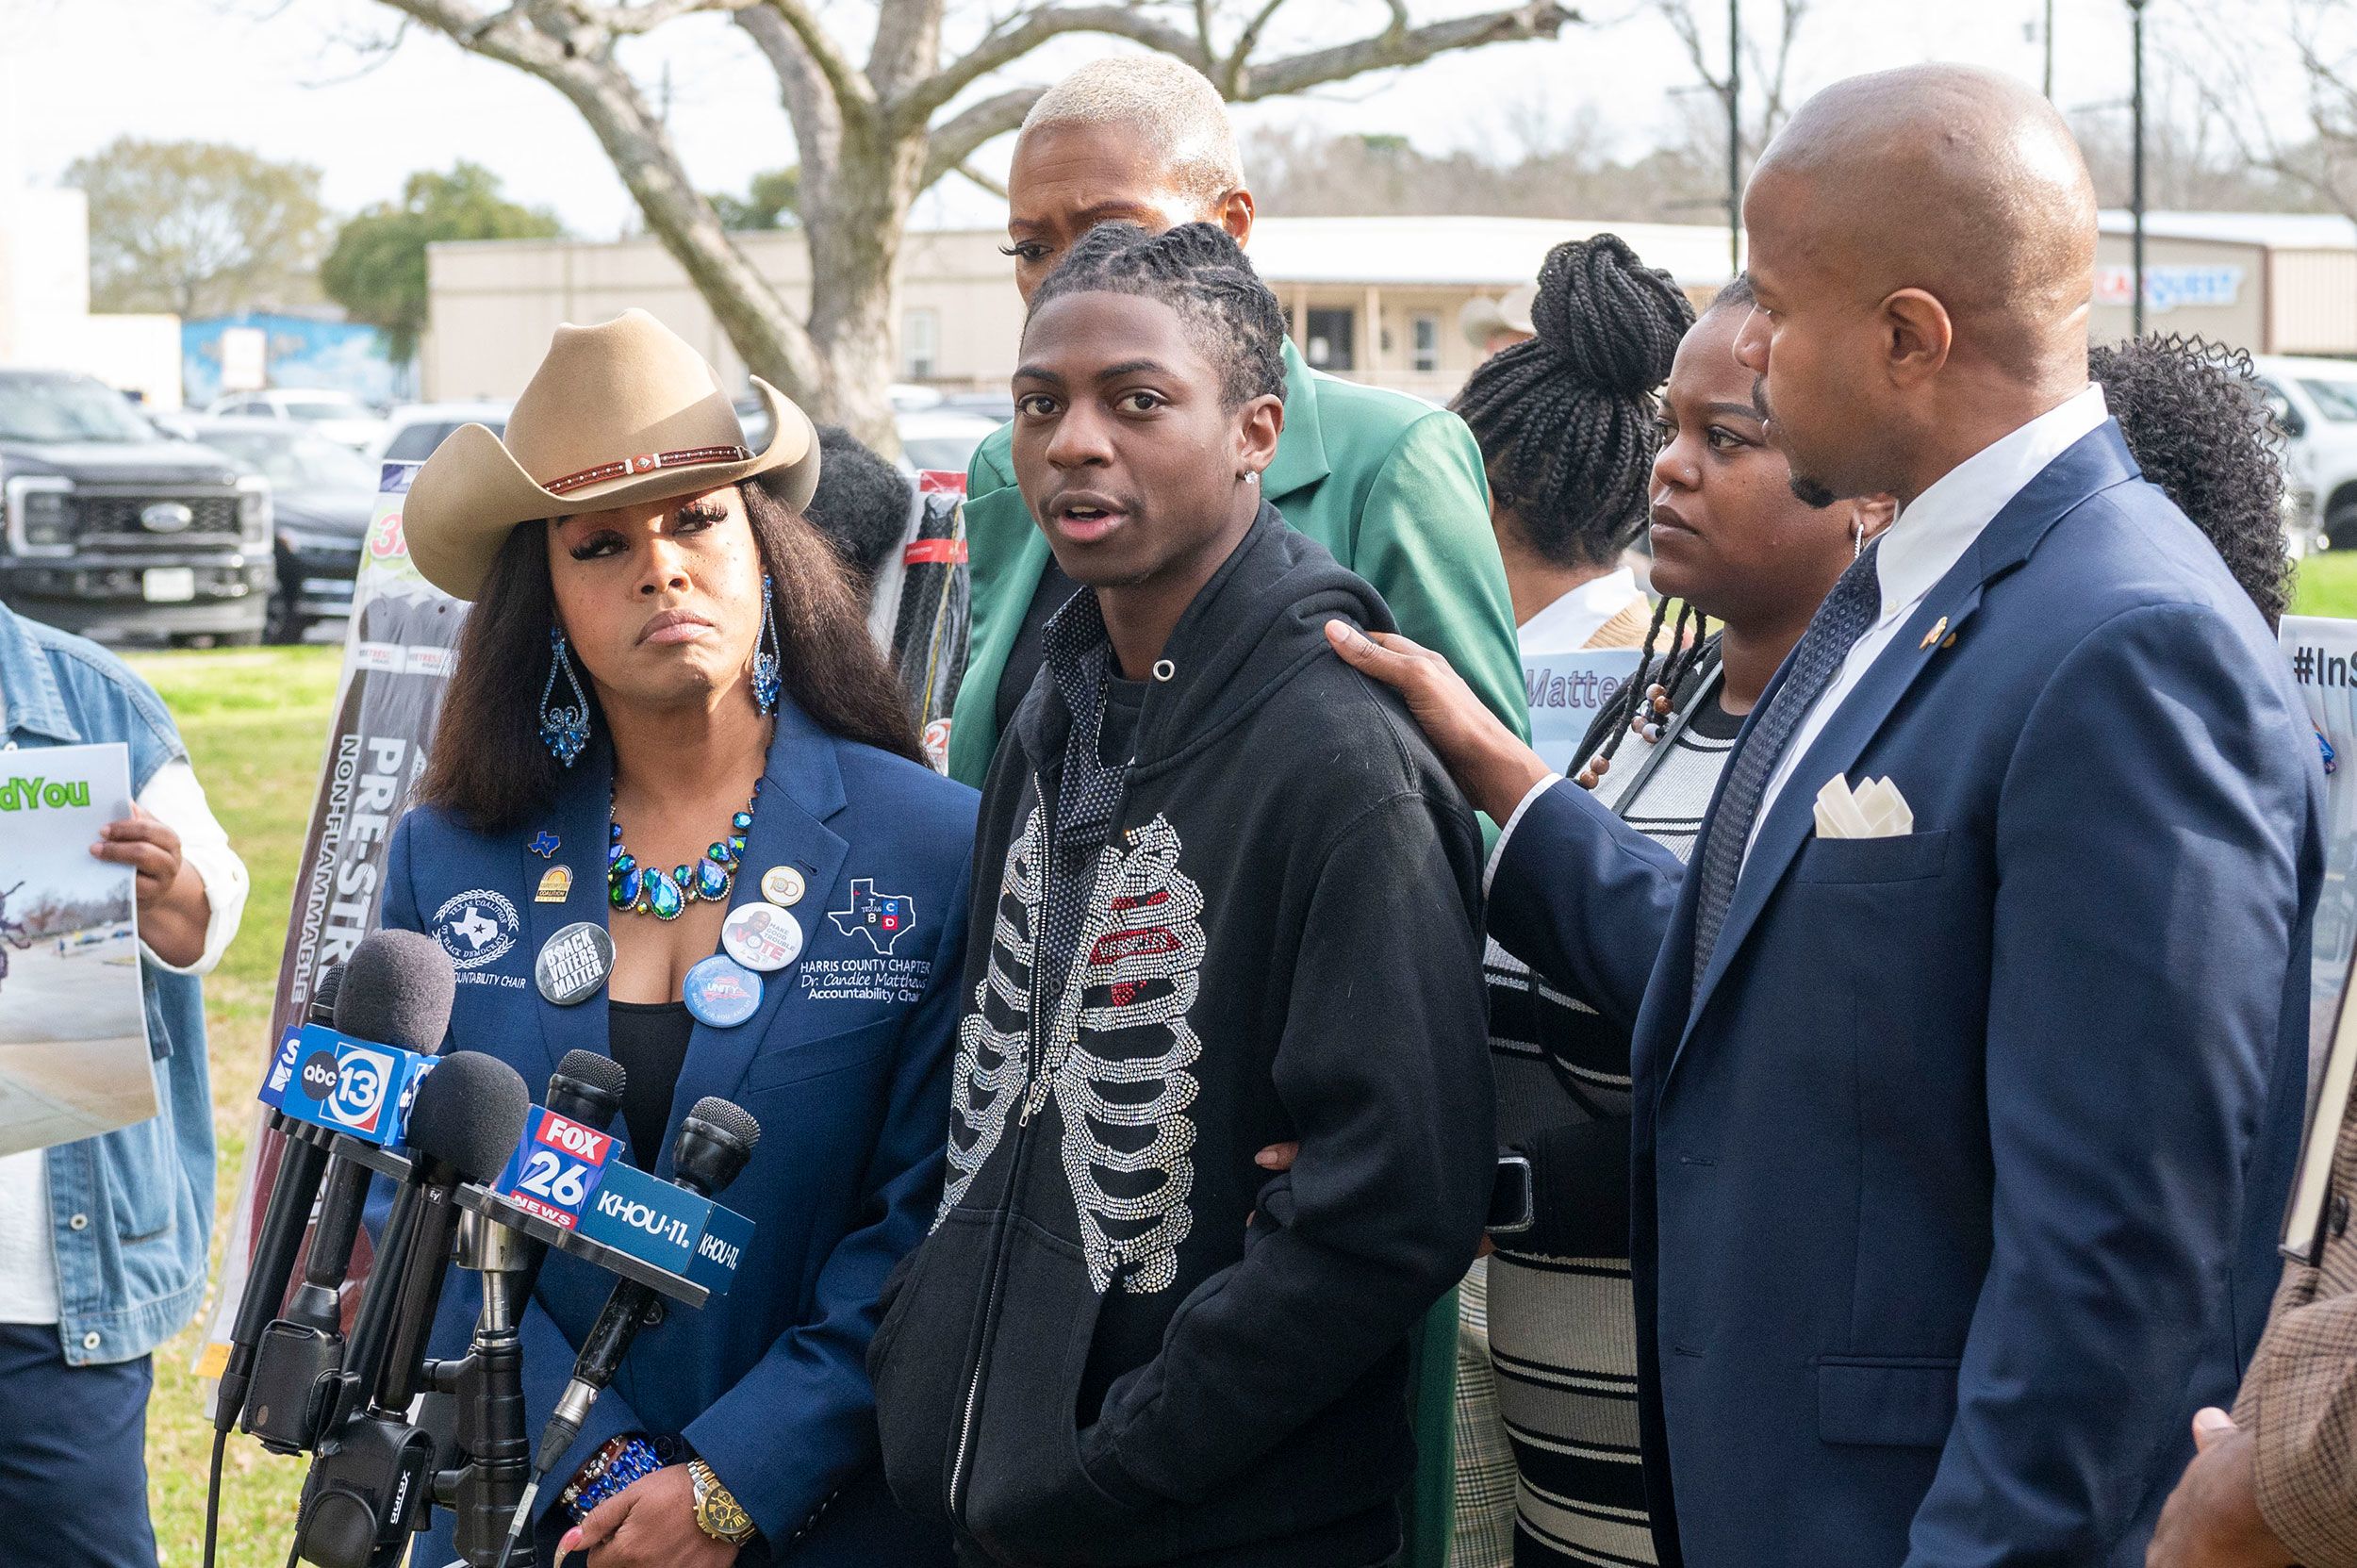 Darryl George — the teen who received a week-plus suspension over his loc  hairstyle days after Texas' CROWN Act went into effect —